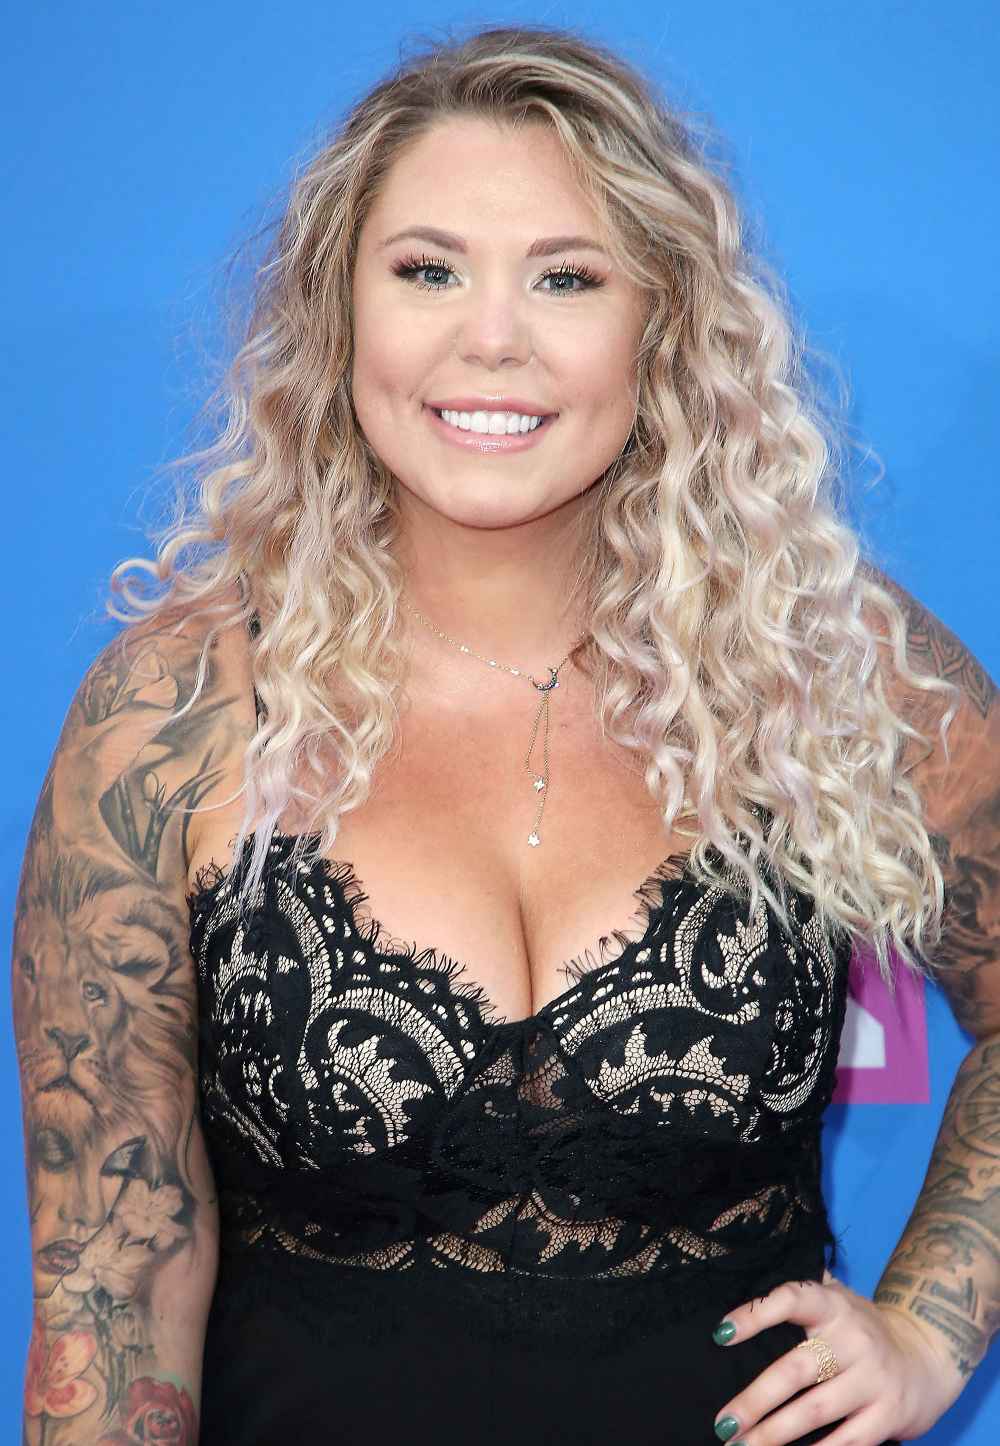 Kailyn Lowry Experiencing Subchorionic Bleeding During Pregnancy